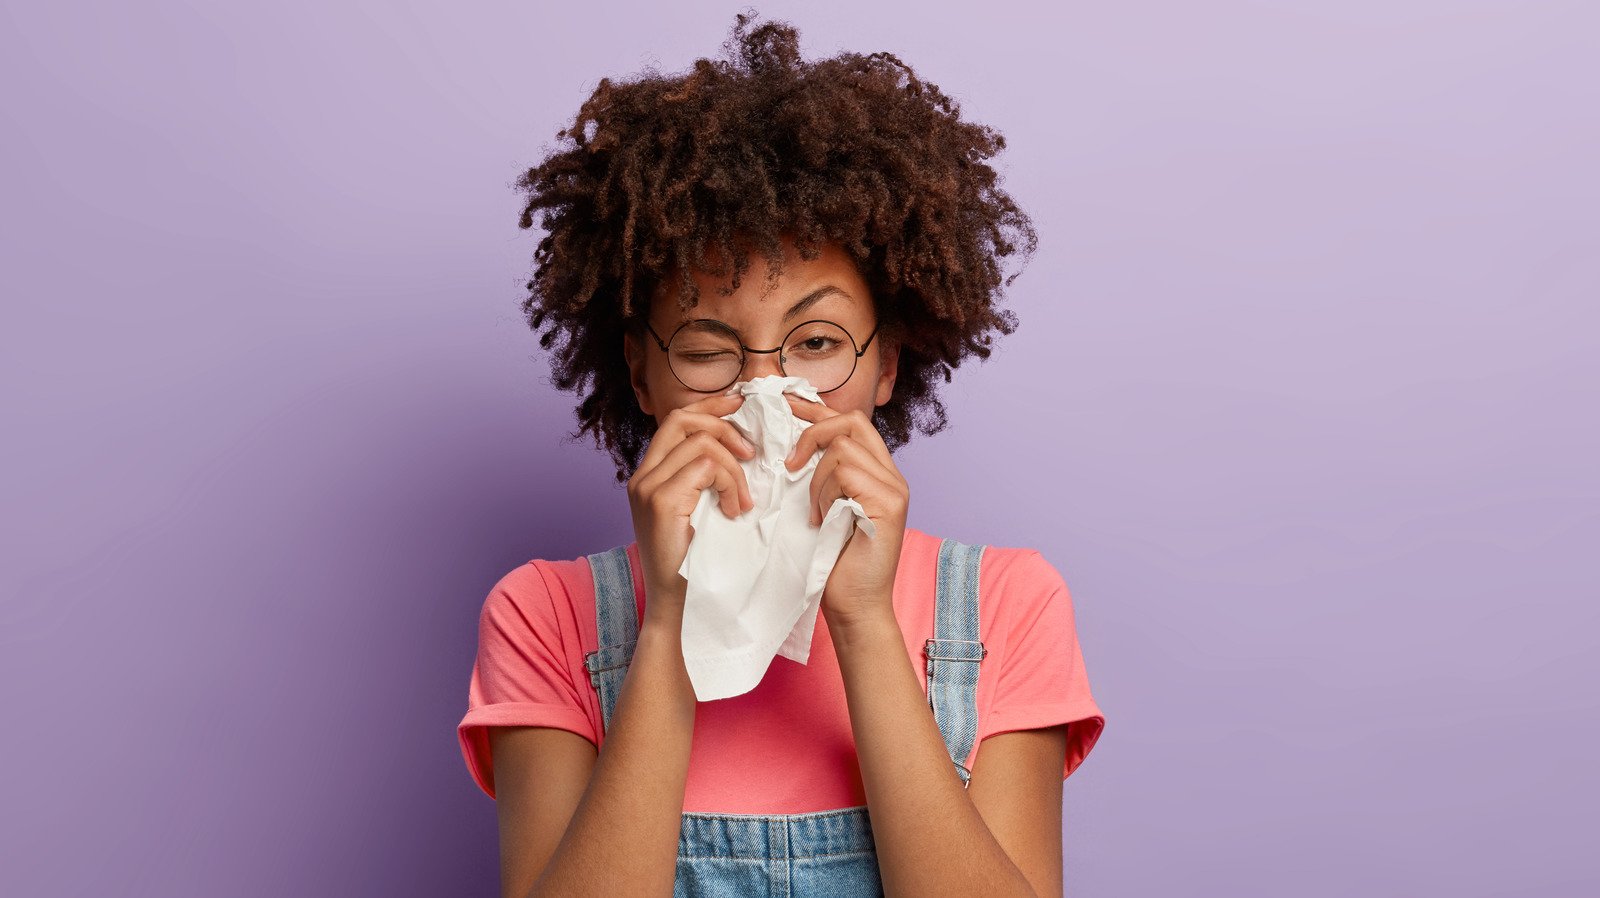 Surprising Allergies You Probably Never Even Realized You Had